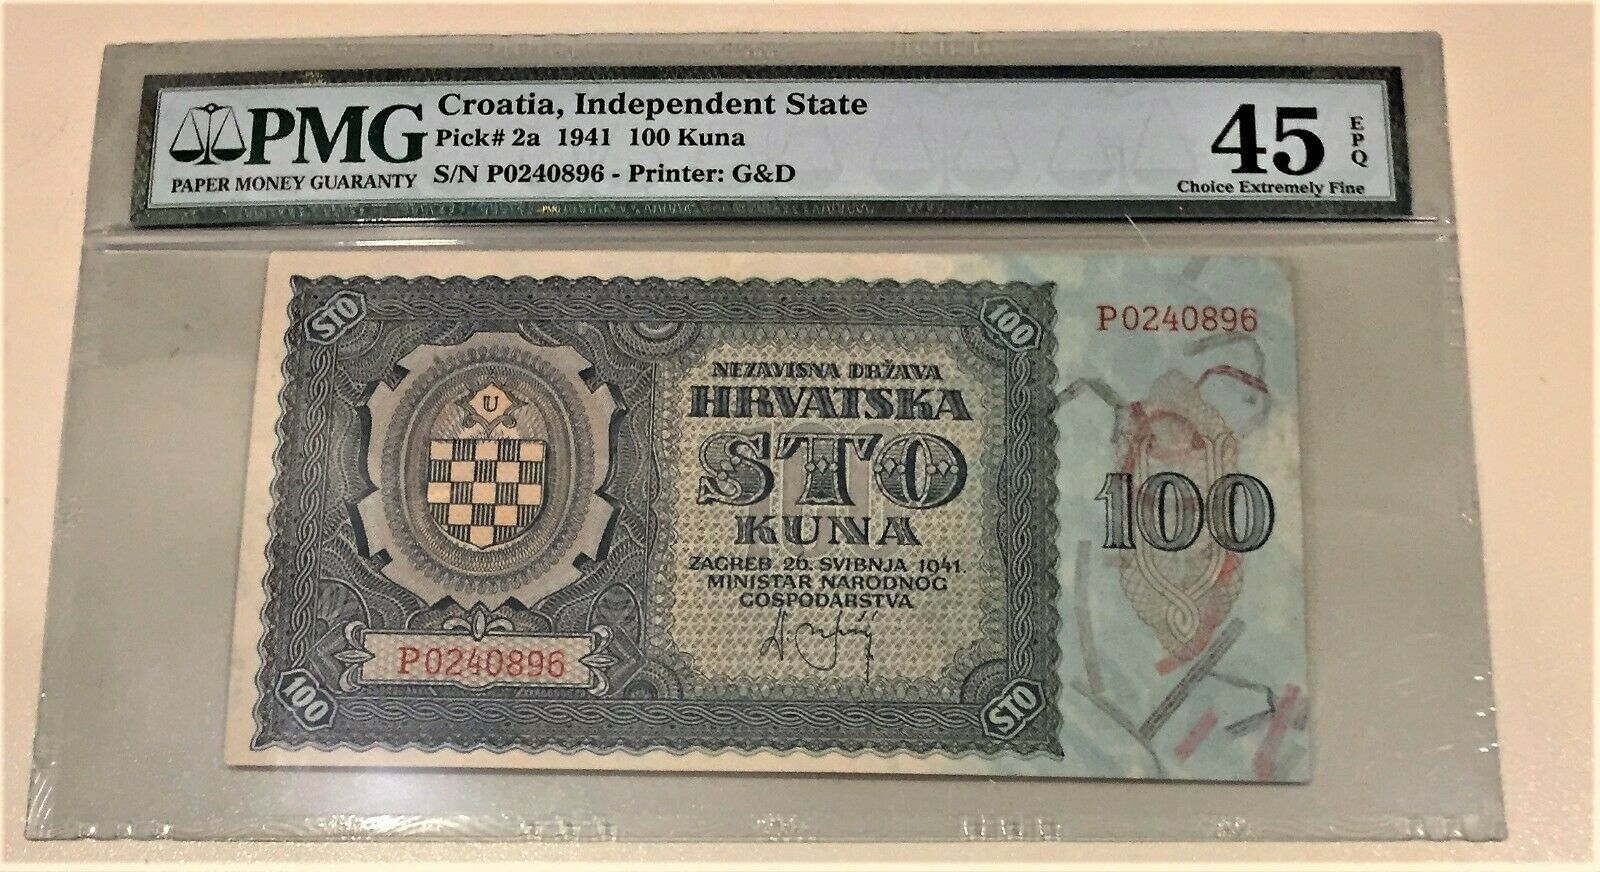 Croatia, Independent State Pick #2a 1941 100 Kuna Note-pmg 45 Epq Extremely Fine